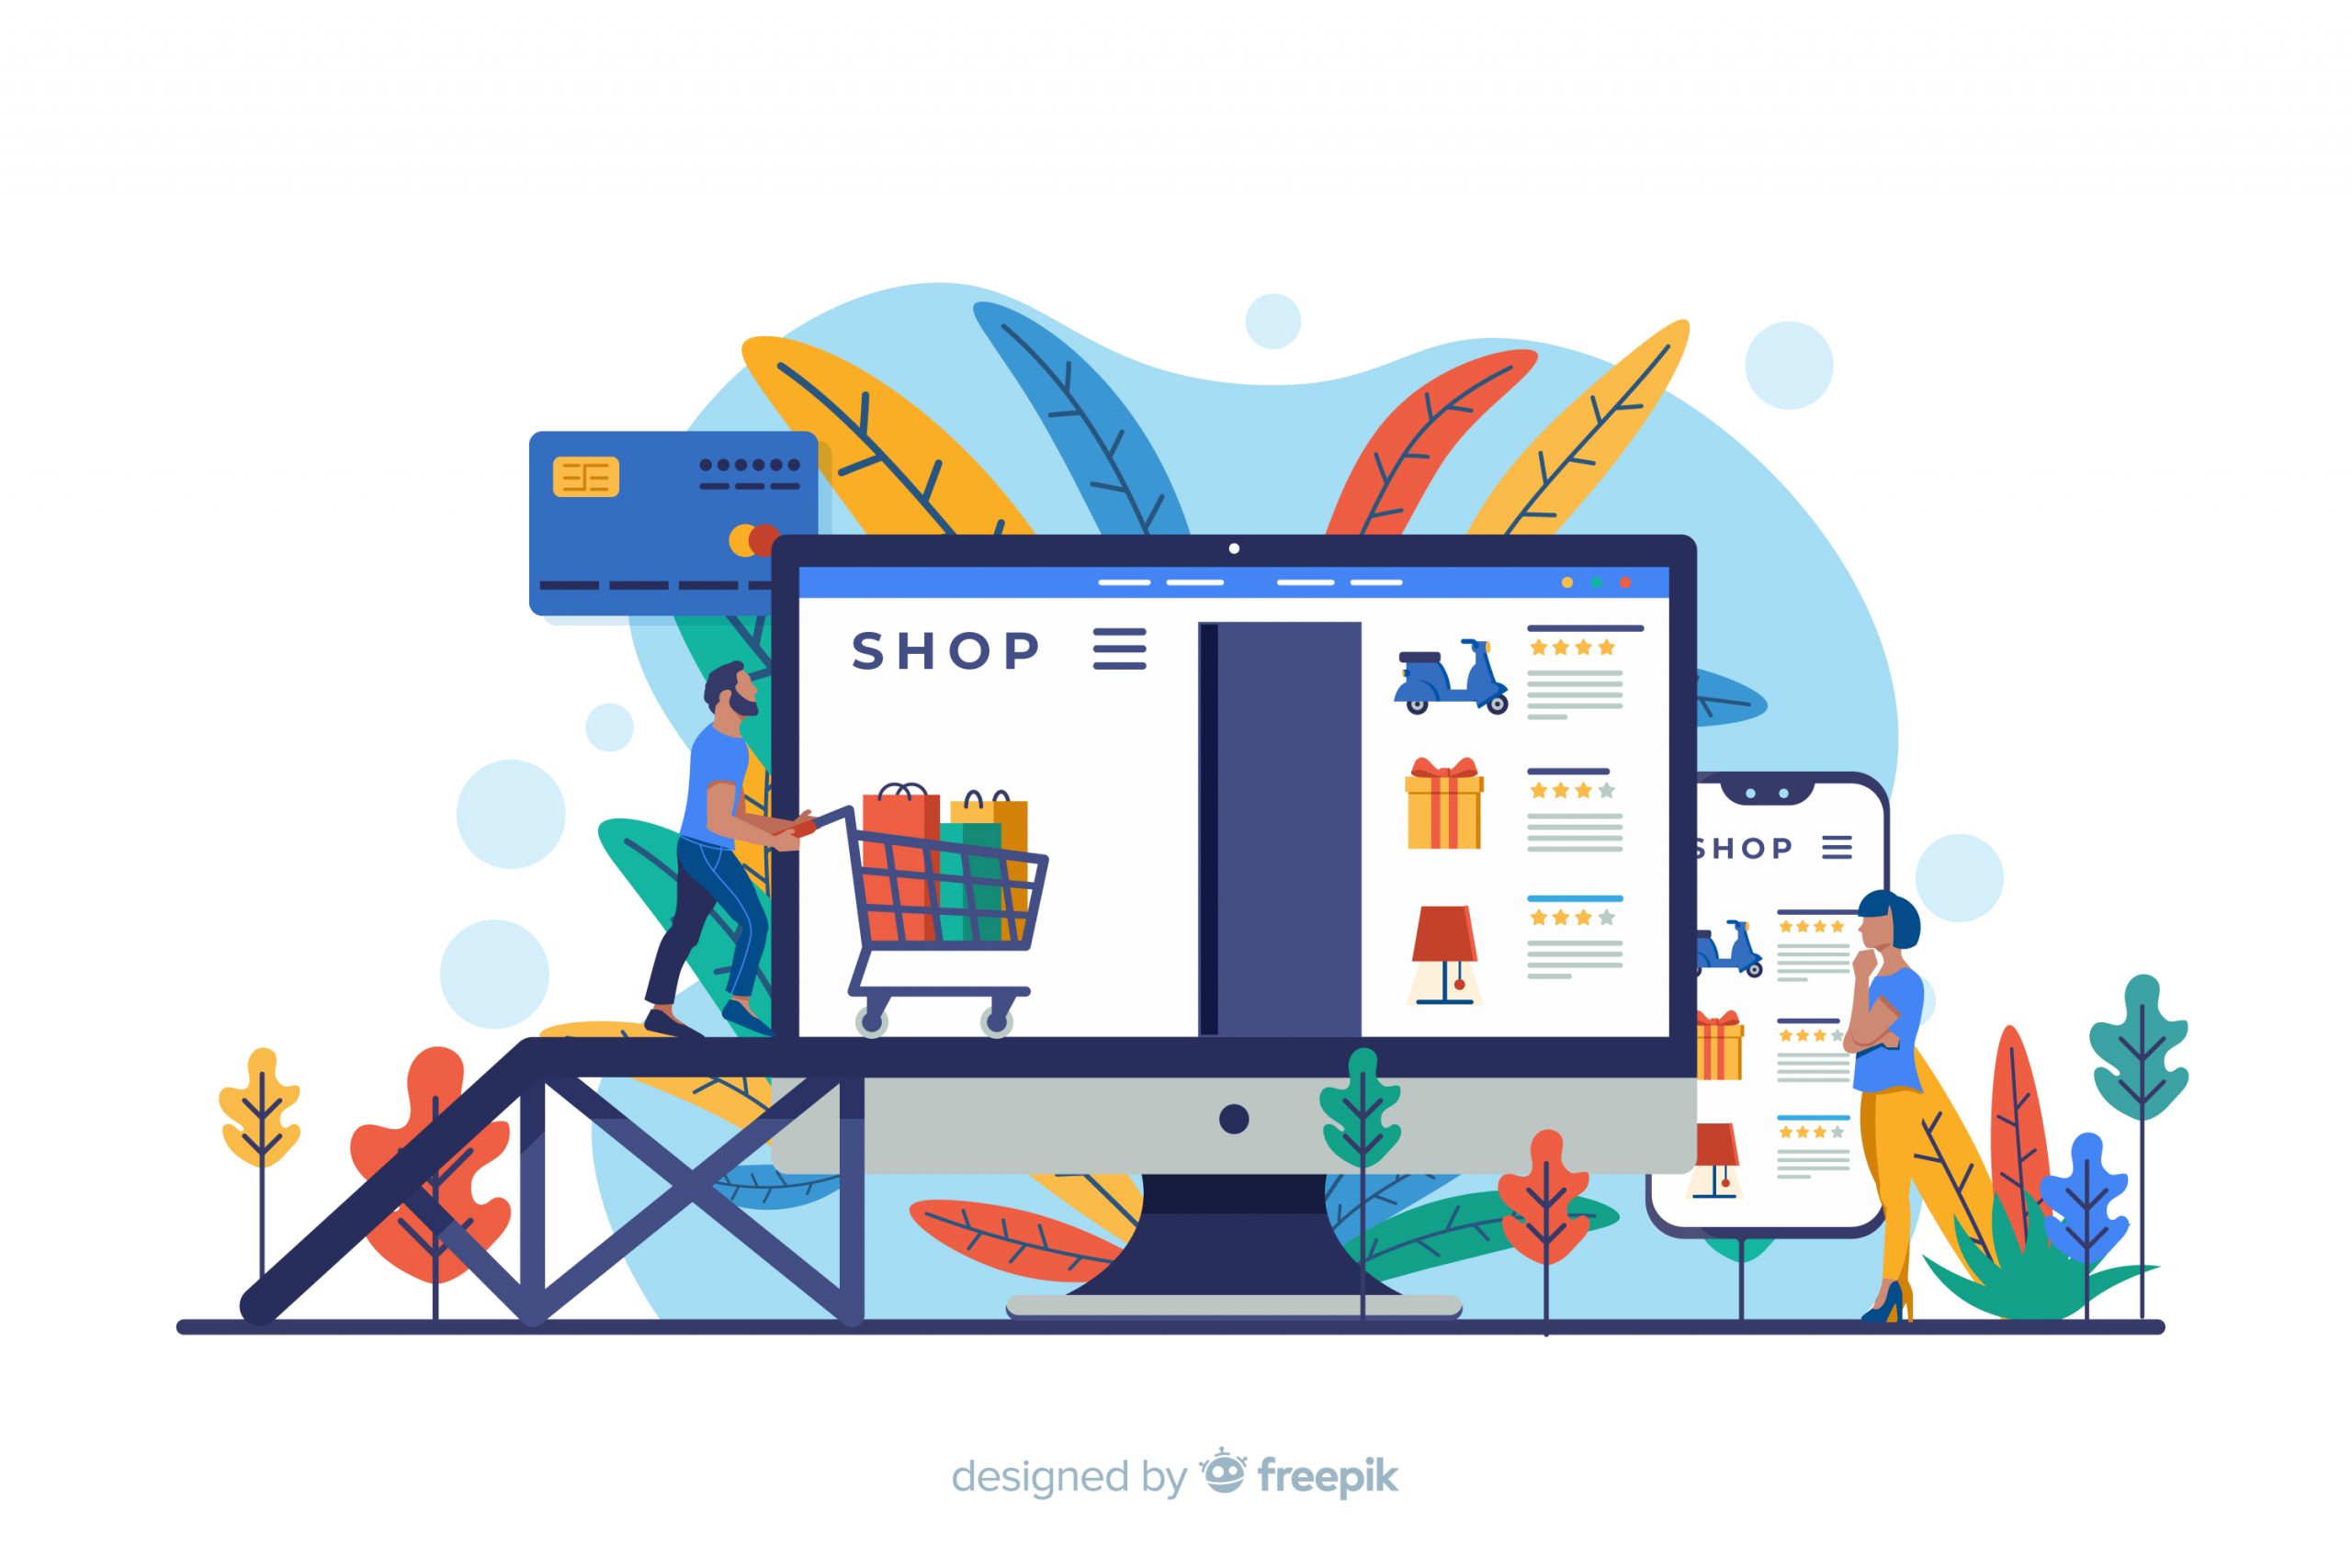 SEO for E-commerce Websites: Best Practices for Product Pages, Category Pages, and Site Architecture